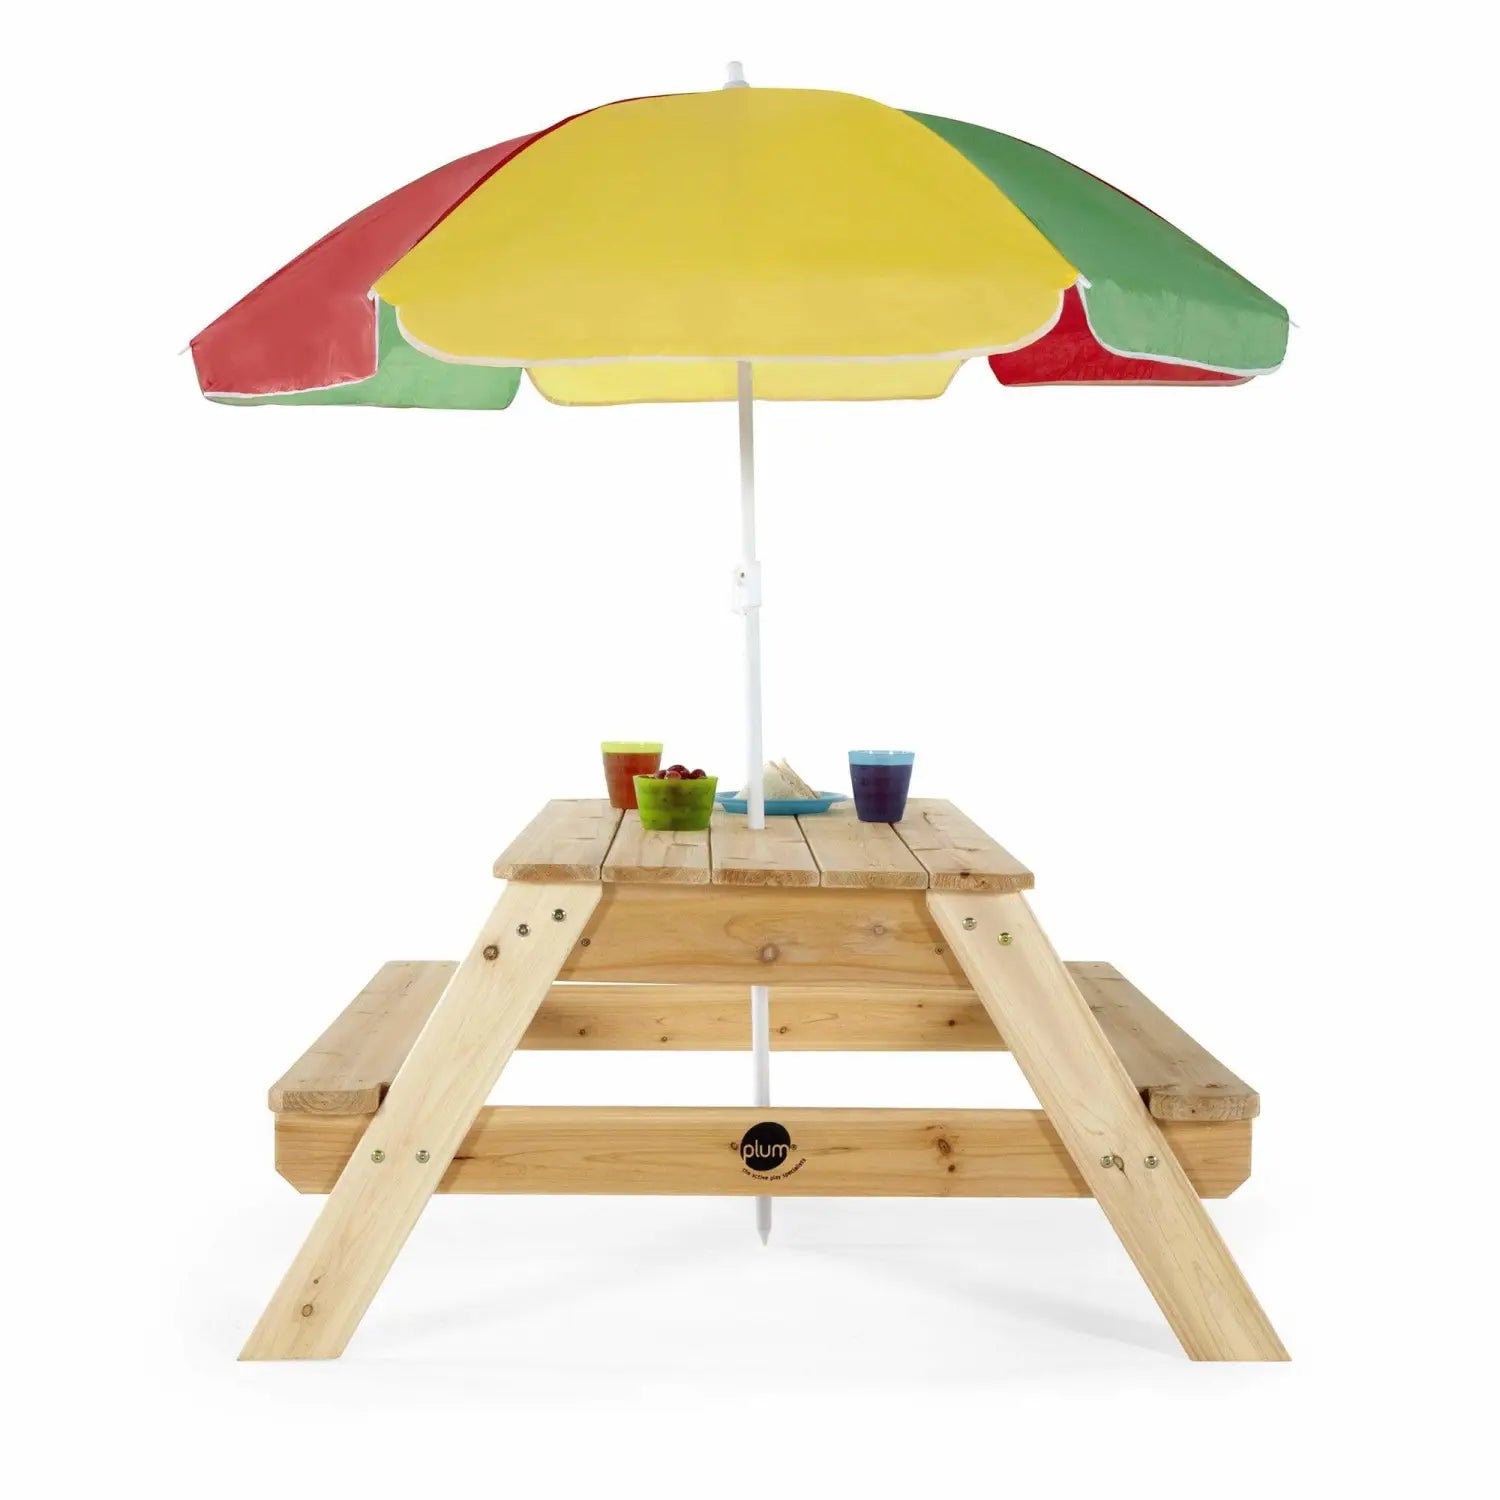 Kid-Friendly Outdoor Kids Picnic Tables for Fun in the Sun or Shade